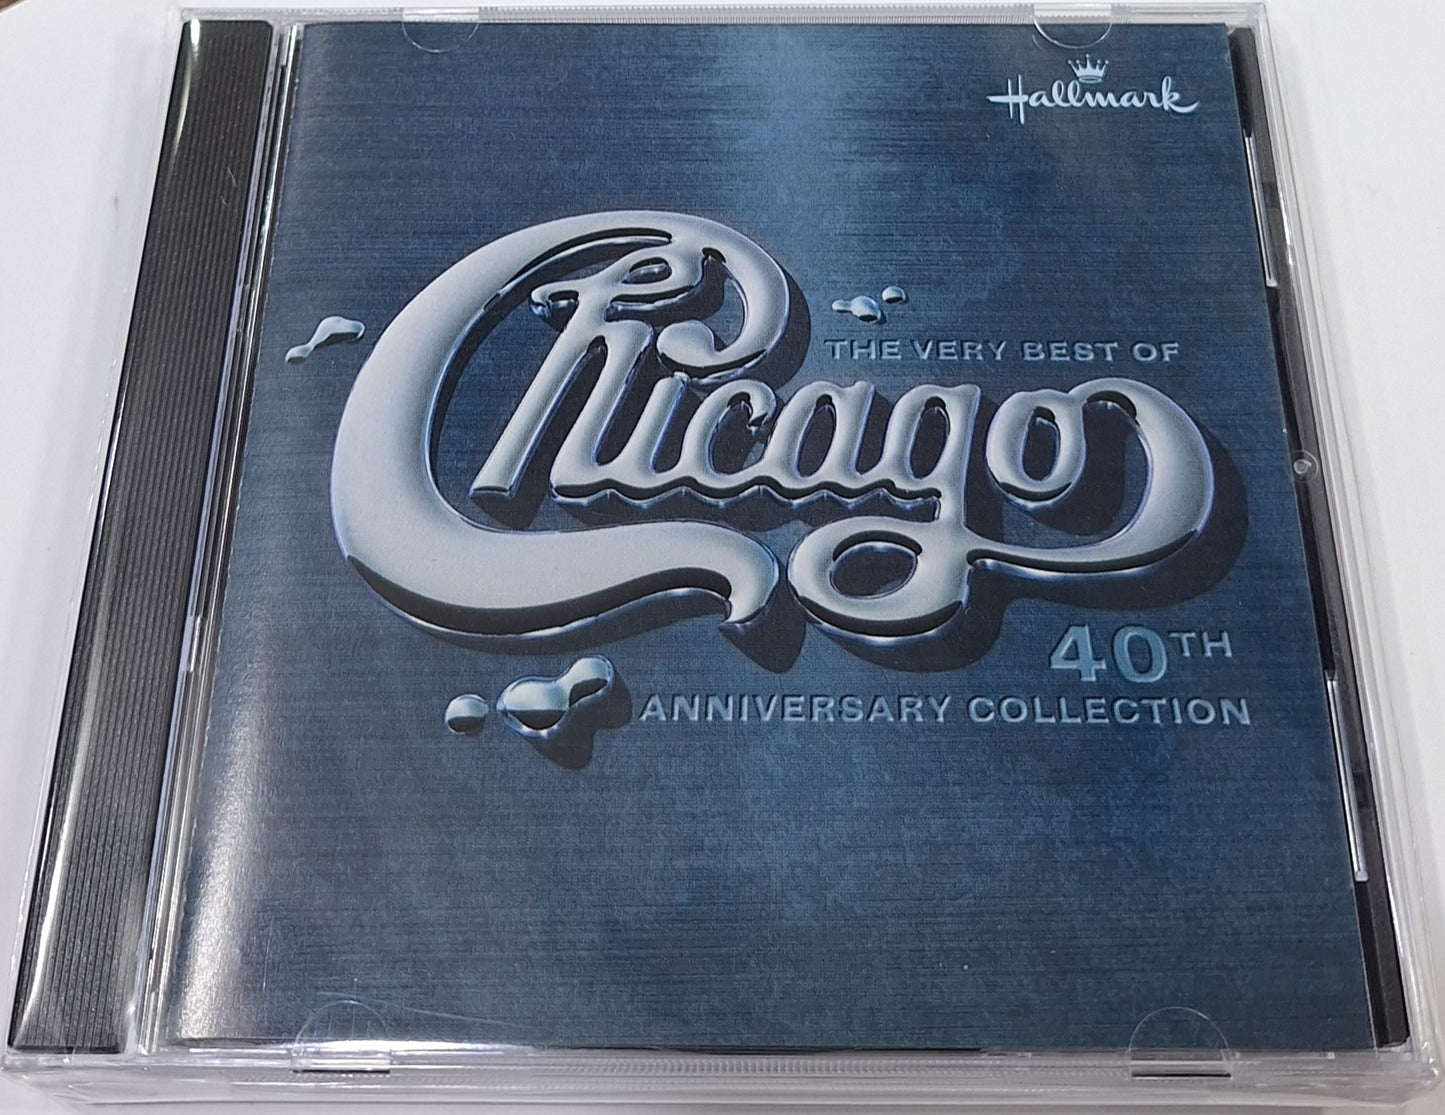 CHICAGO - THE VERY BEST OF  CD